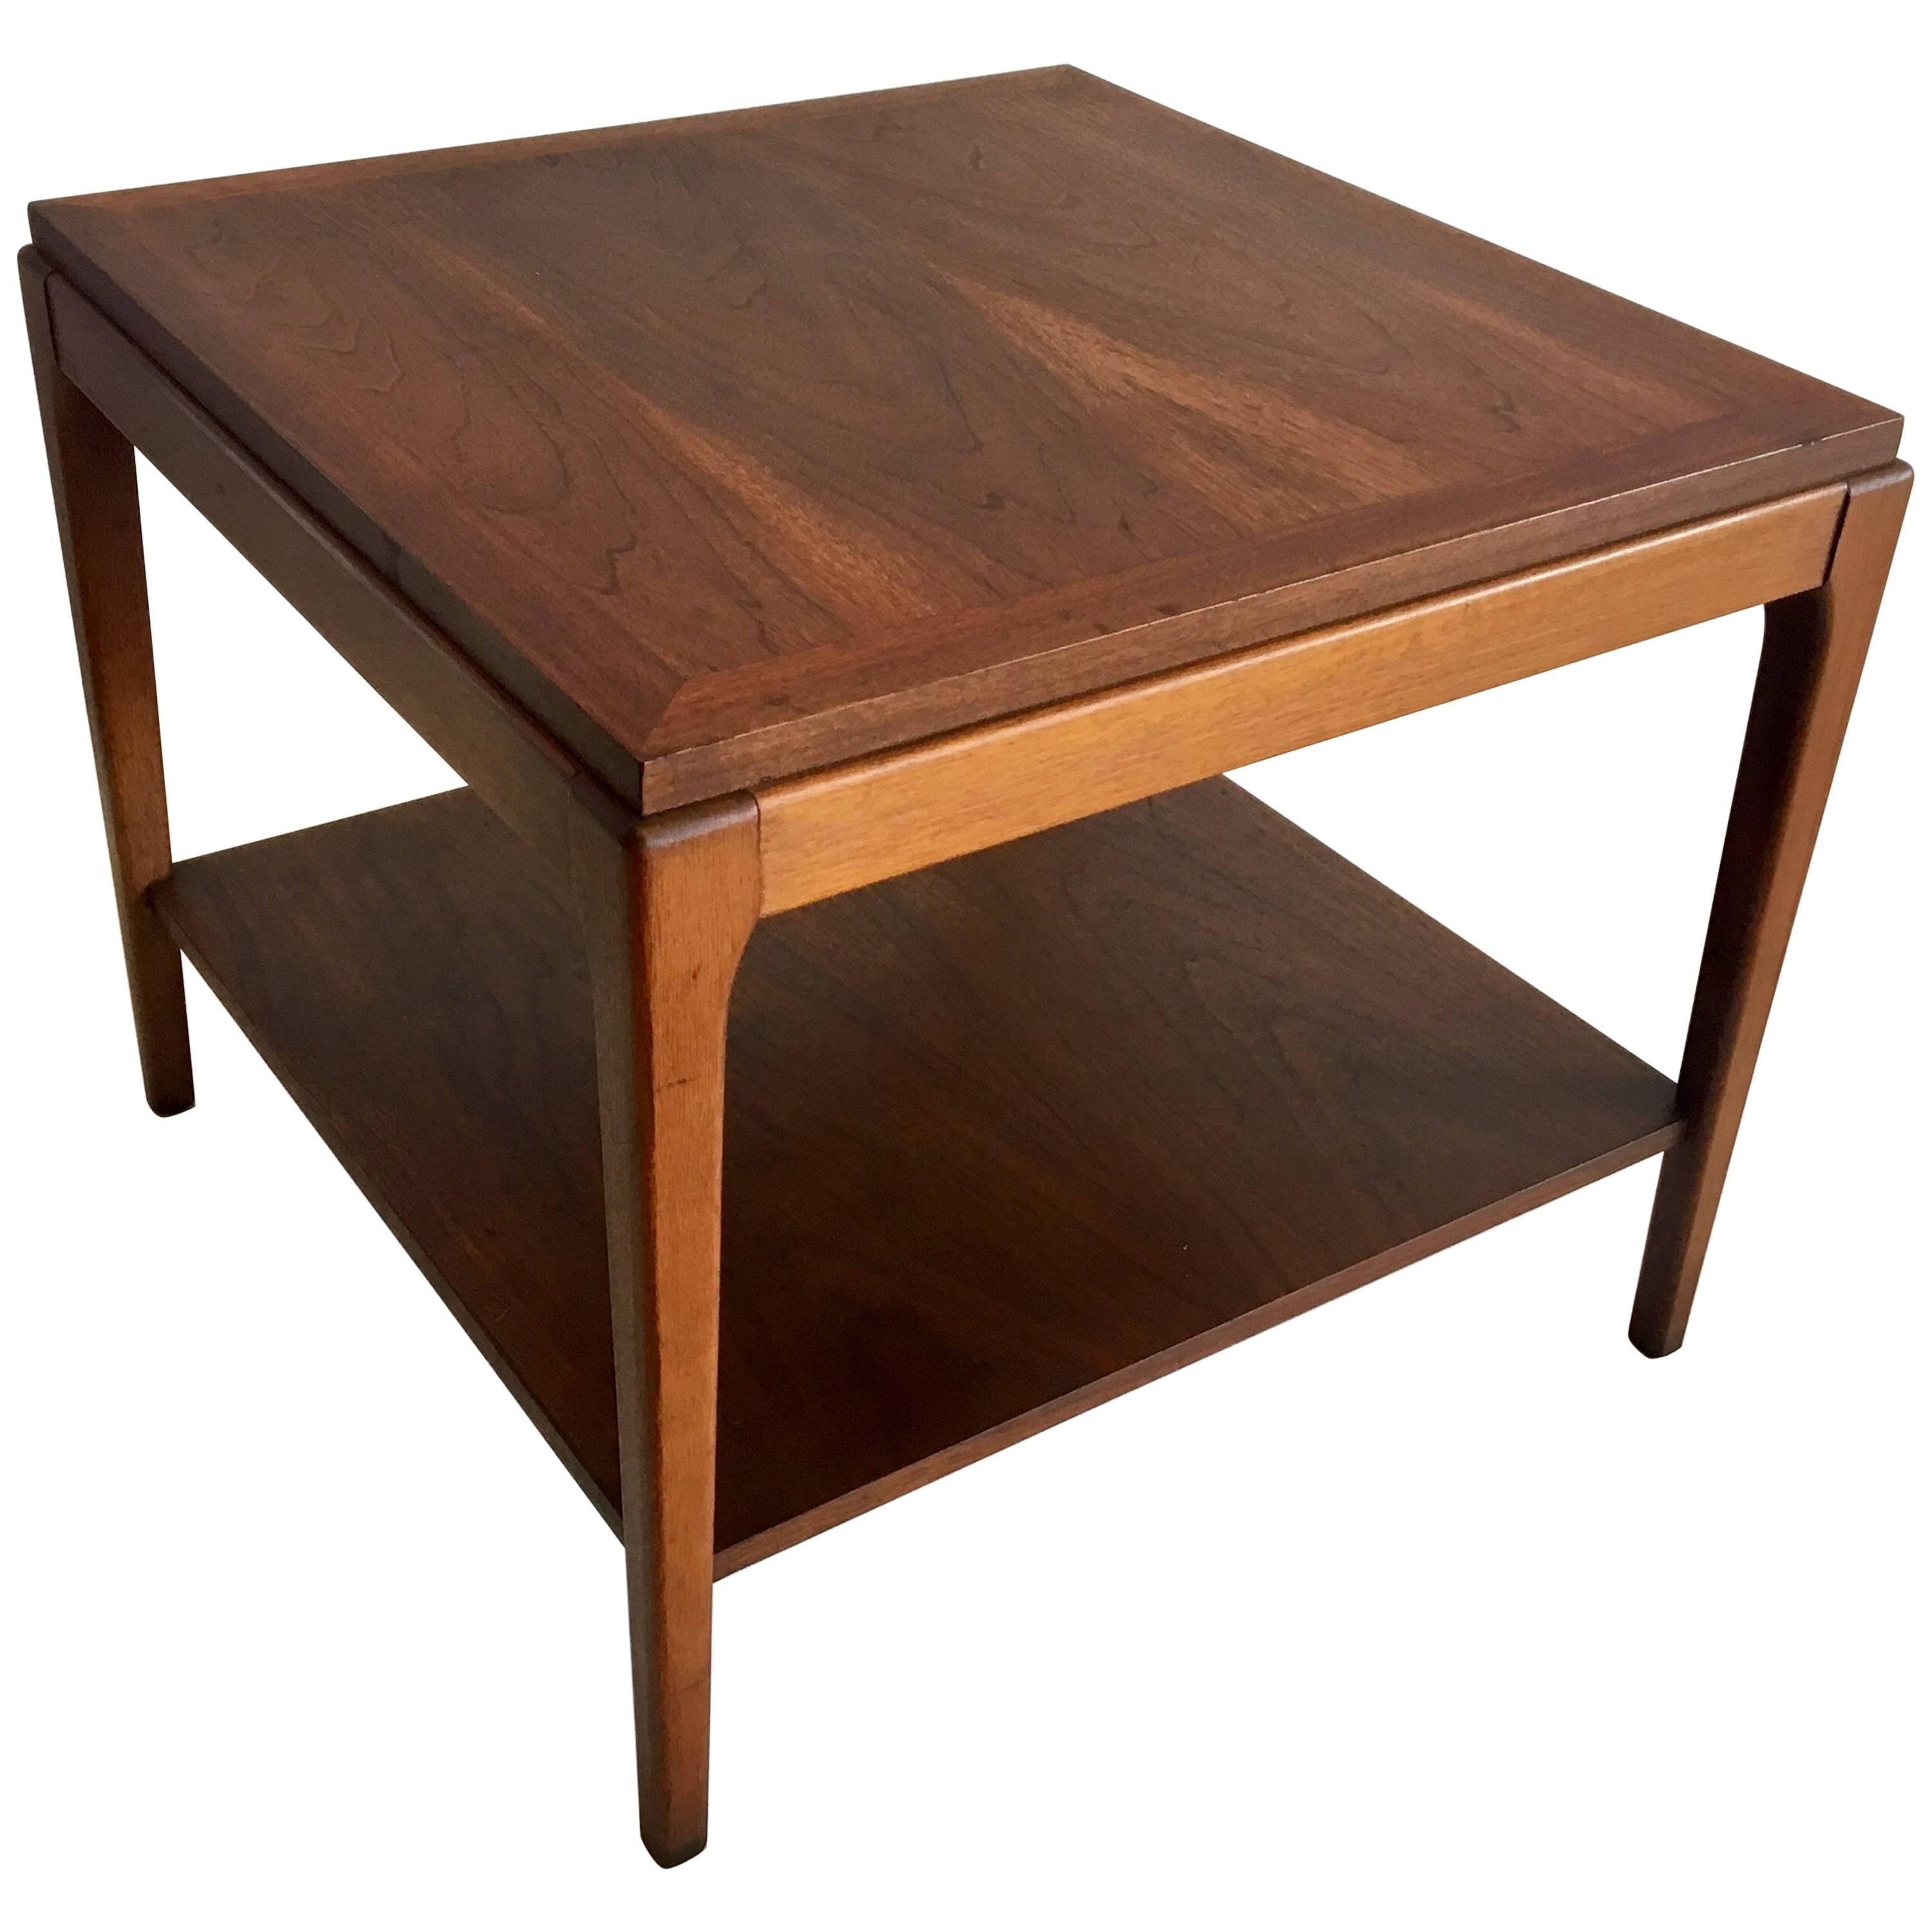 American Mid-Century Modern Walnut Square Cocktail or End Table